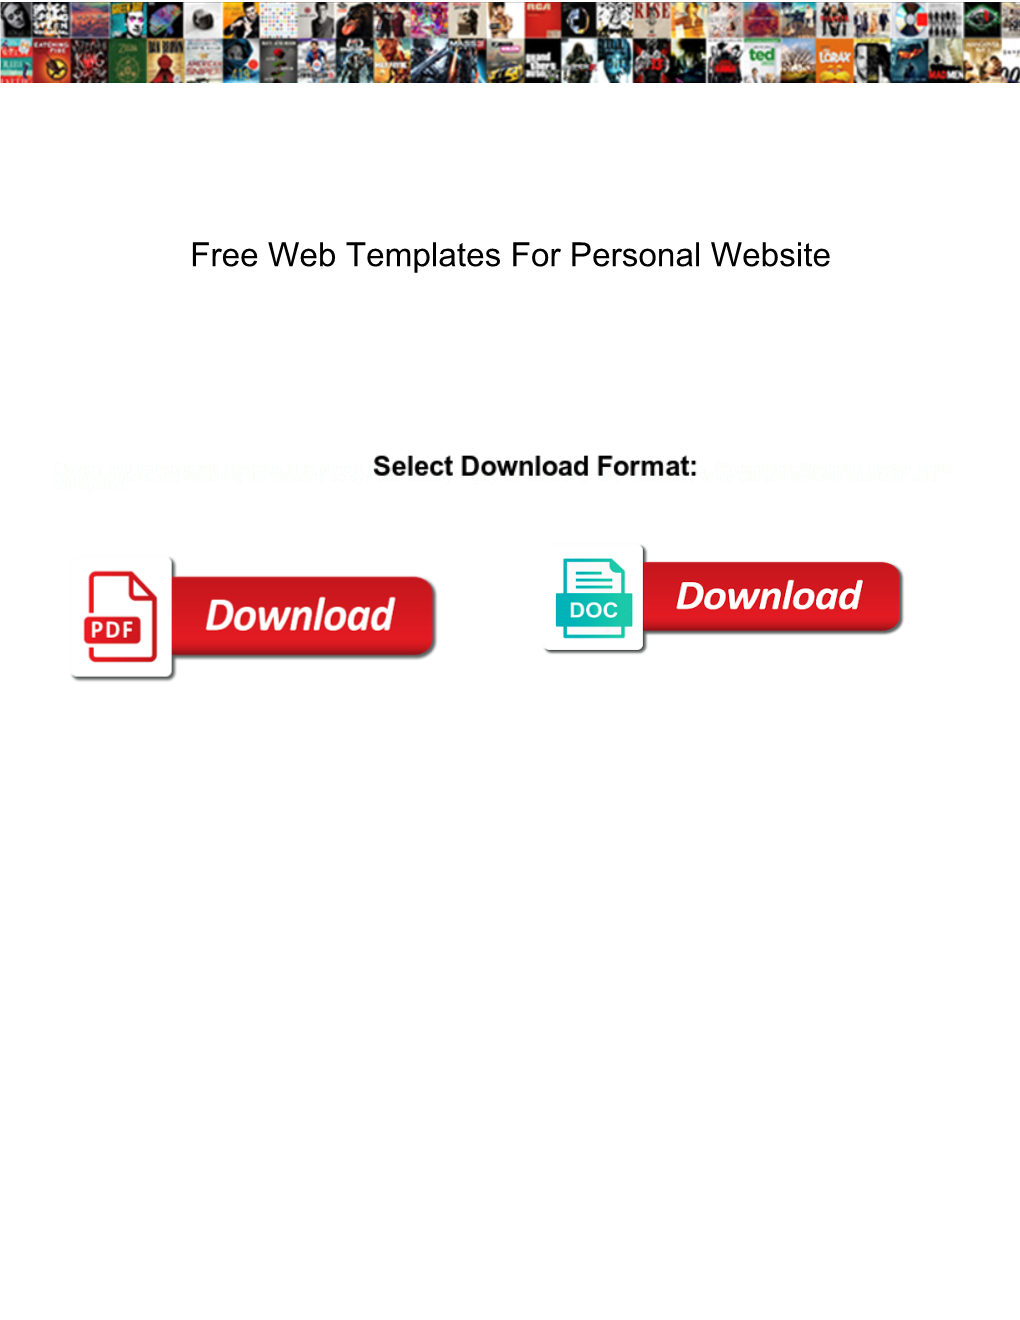 Free Web Templates for Personal Website